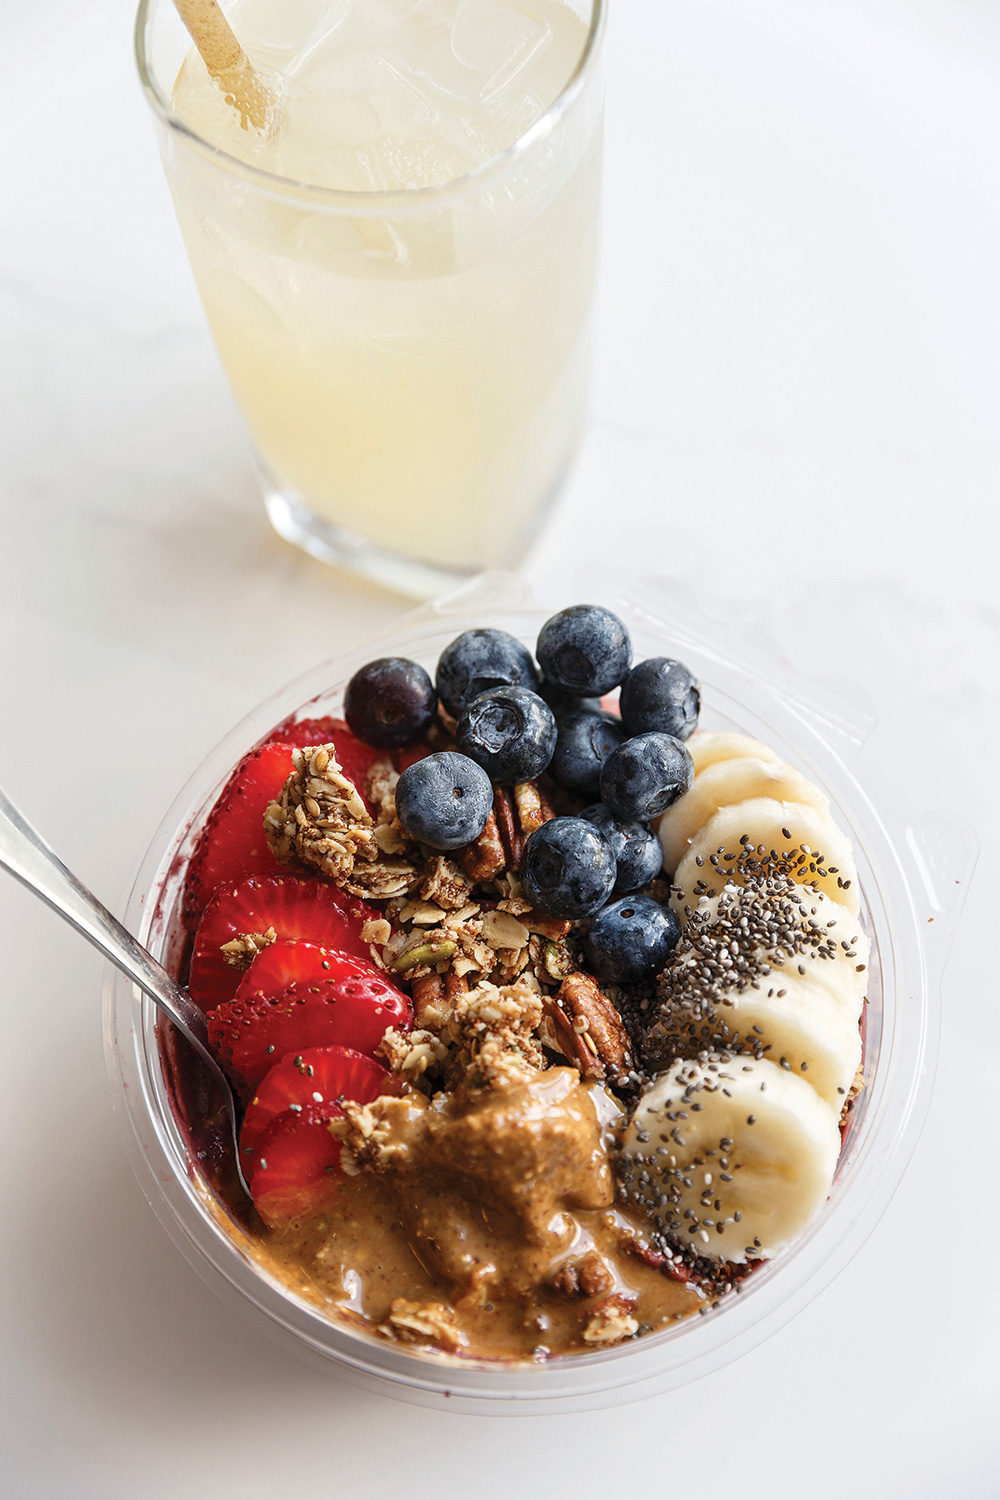 Almond butter acai bowl with teff granola and organic chia seeds.